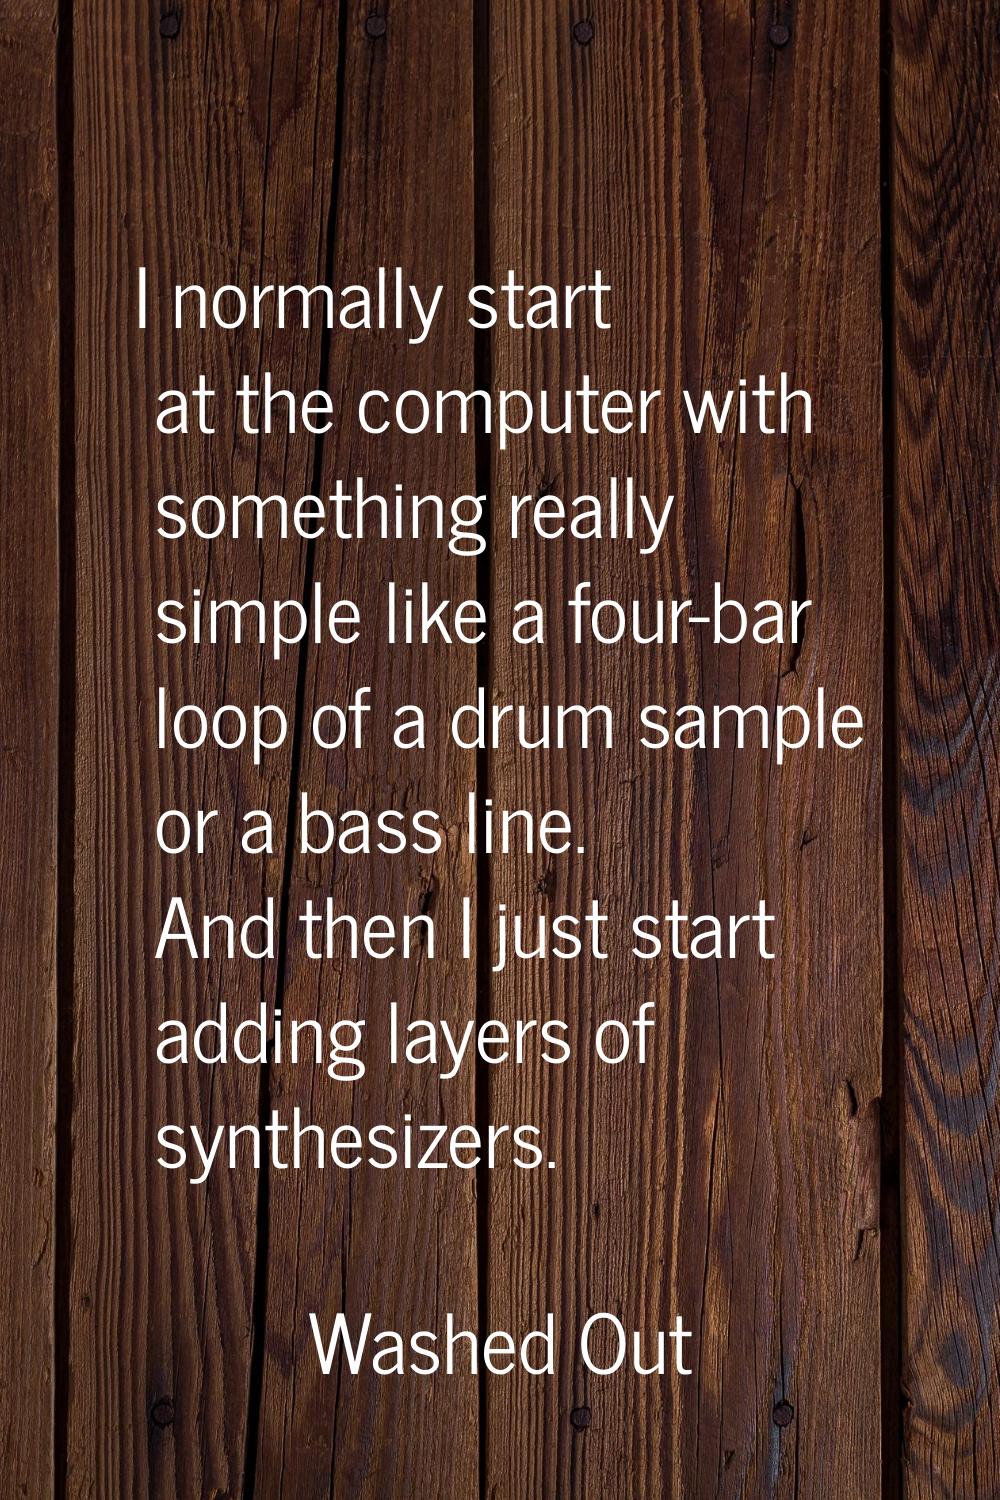 I normally start at the computer with something really simple like a four-bar loop of a drum sample